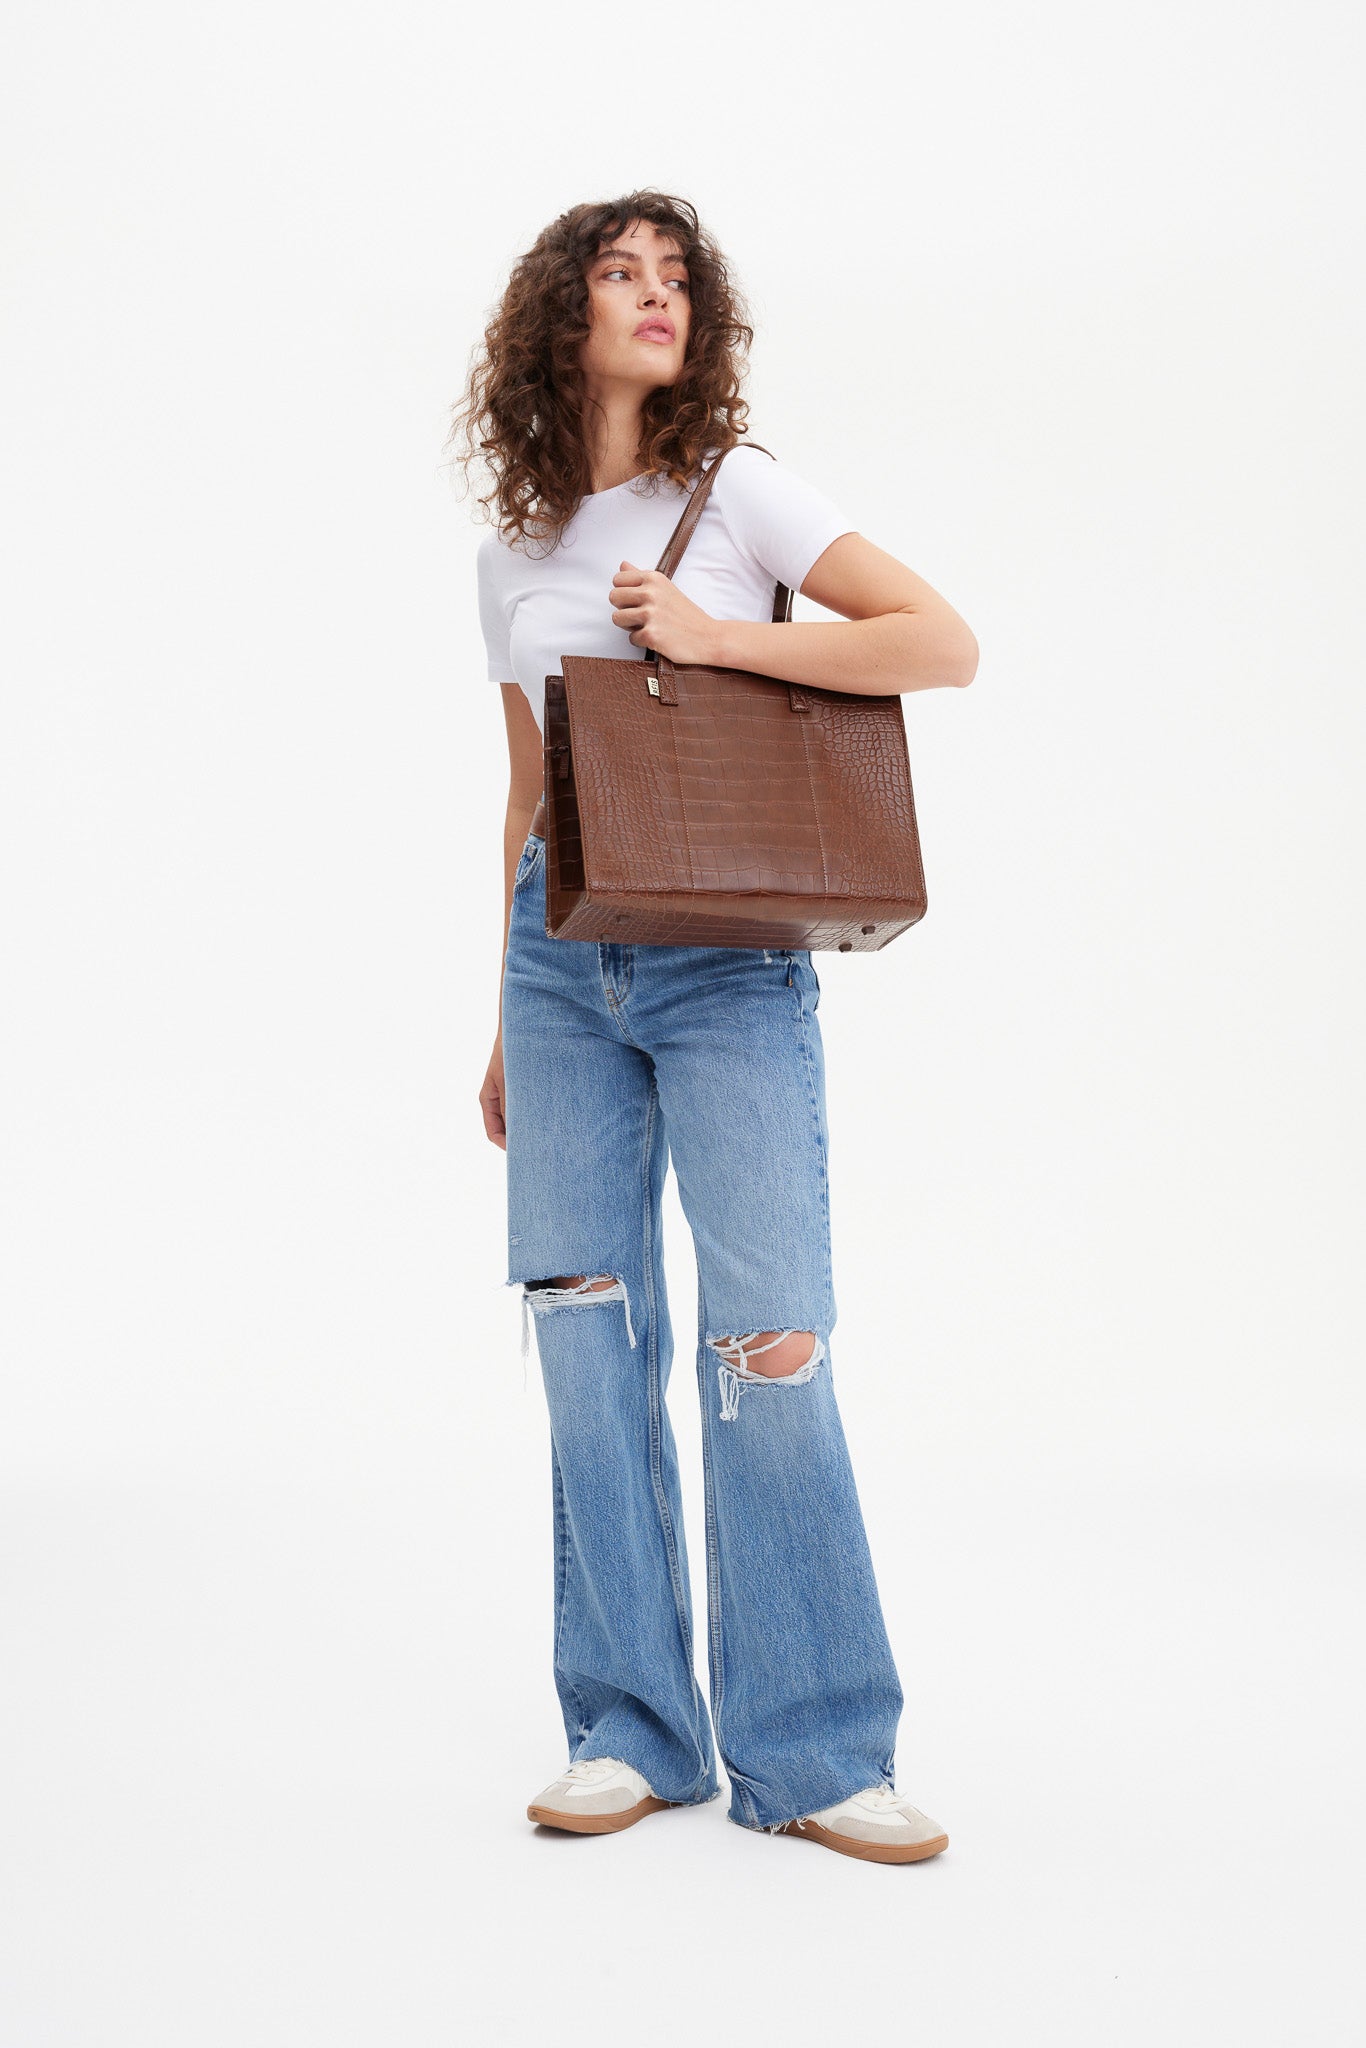 The Work Tote in Maple